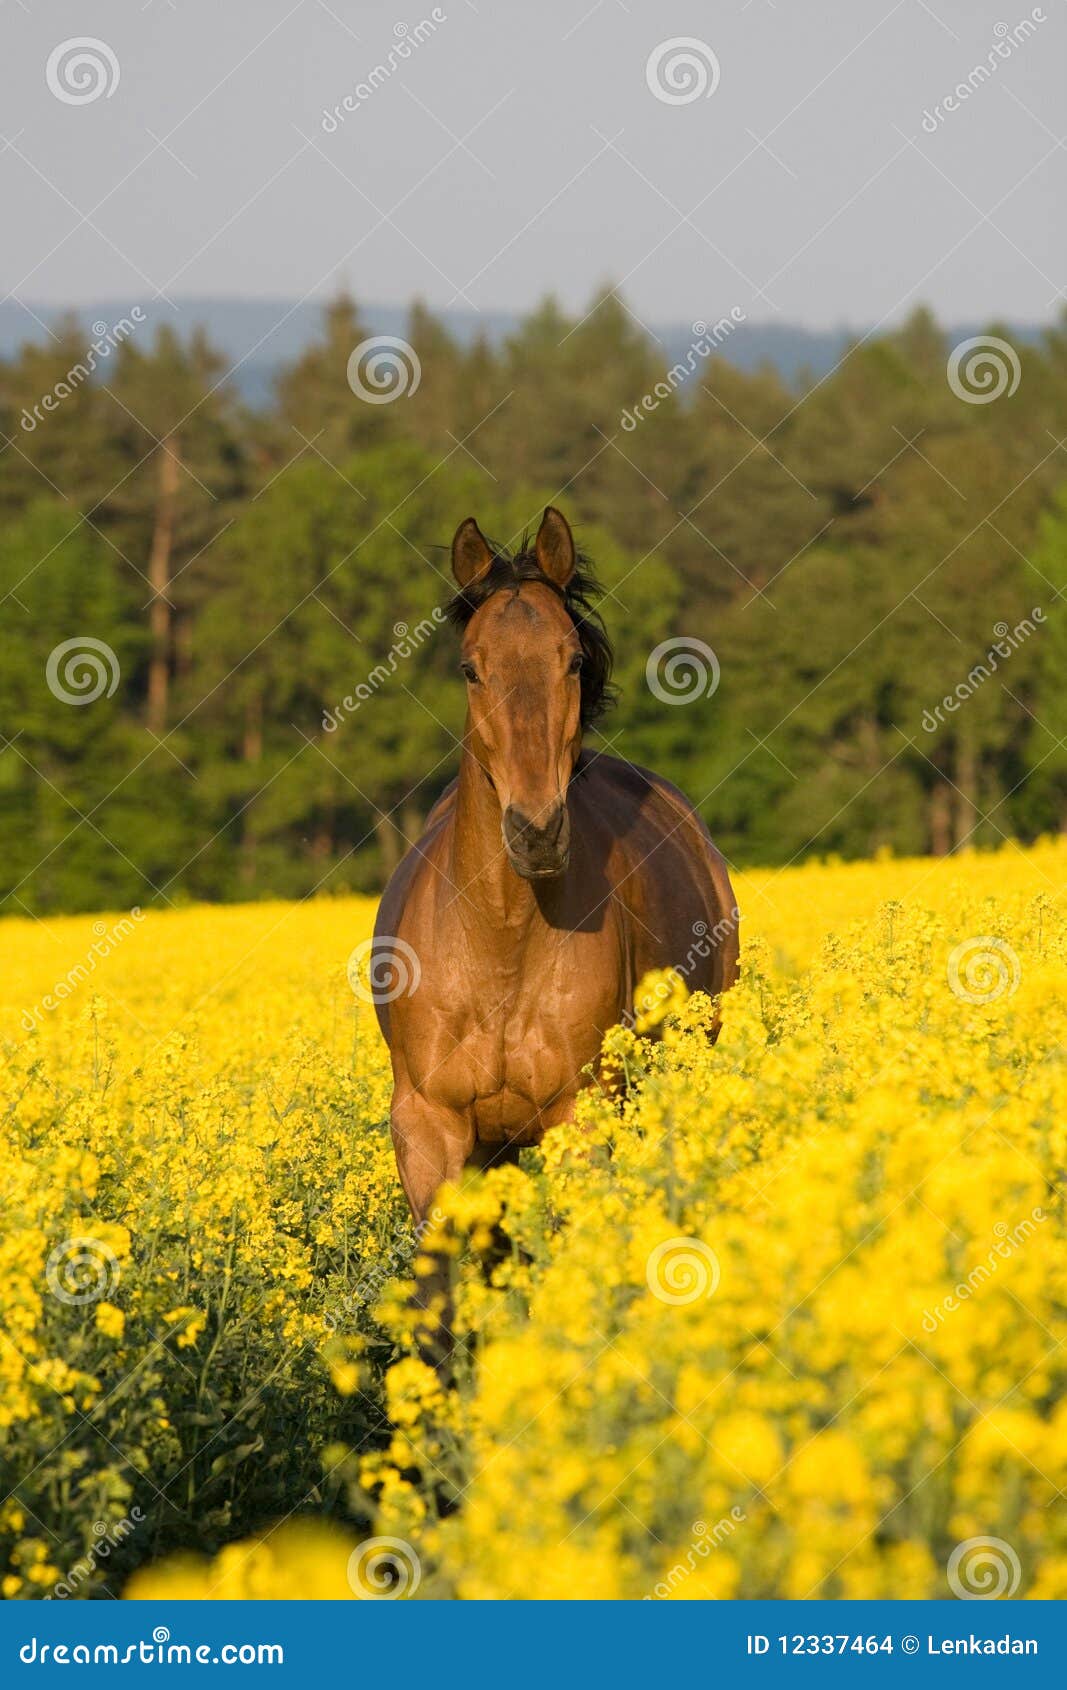 running horse in the colza field